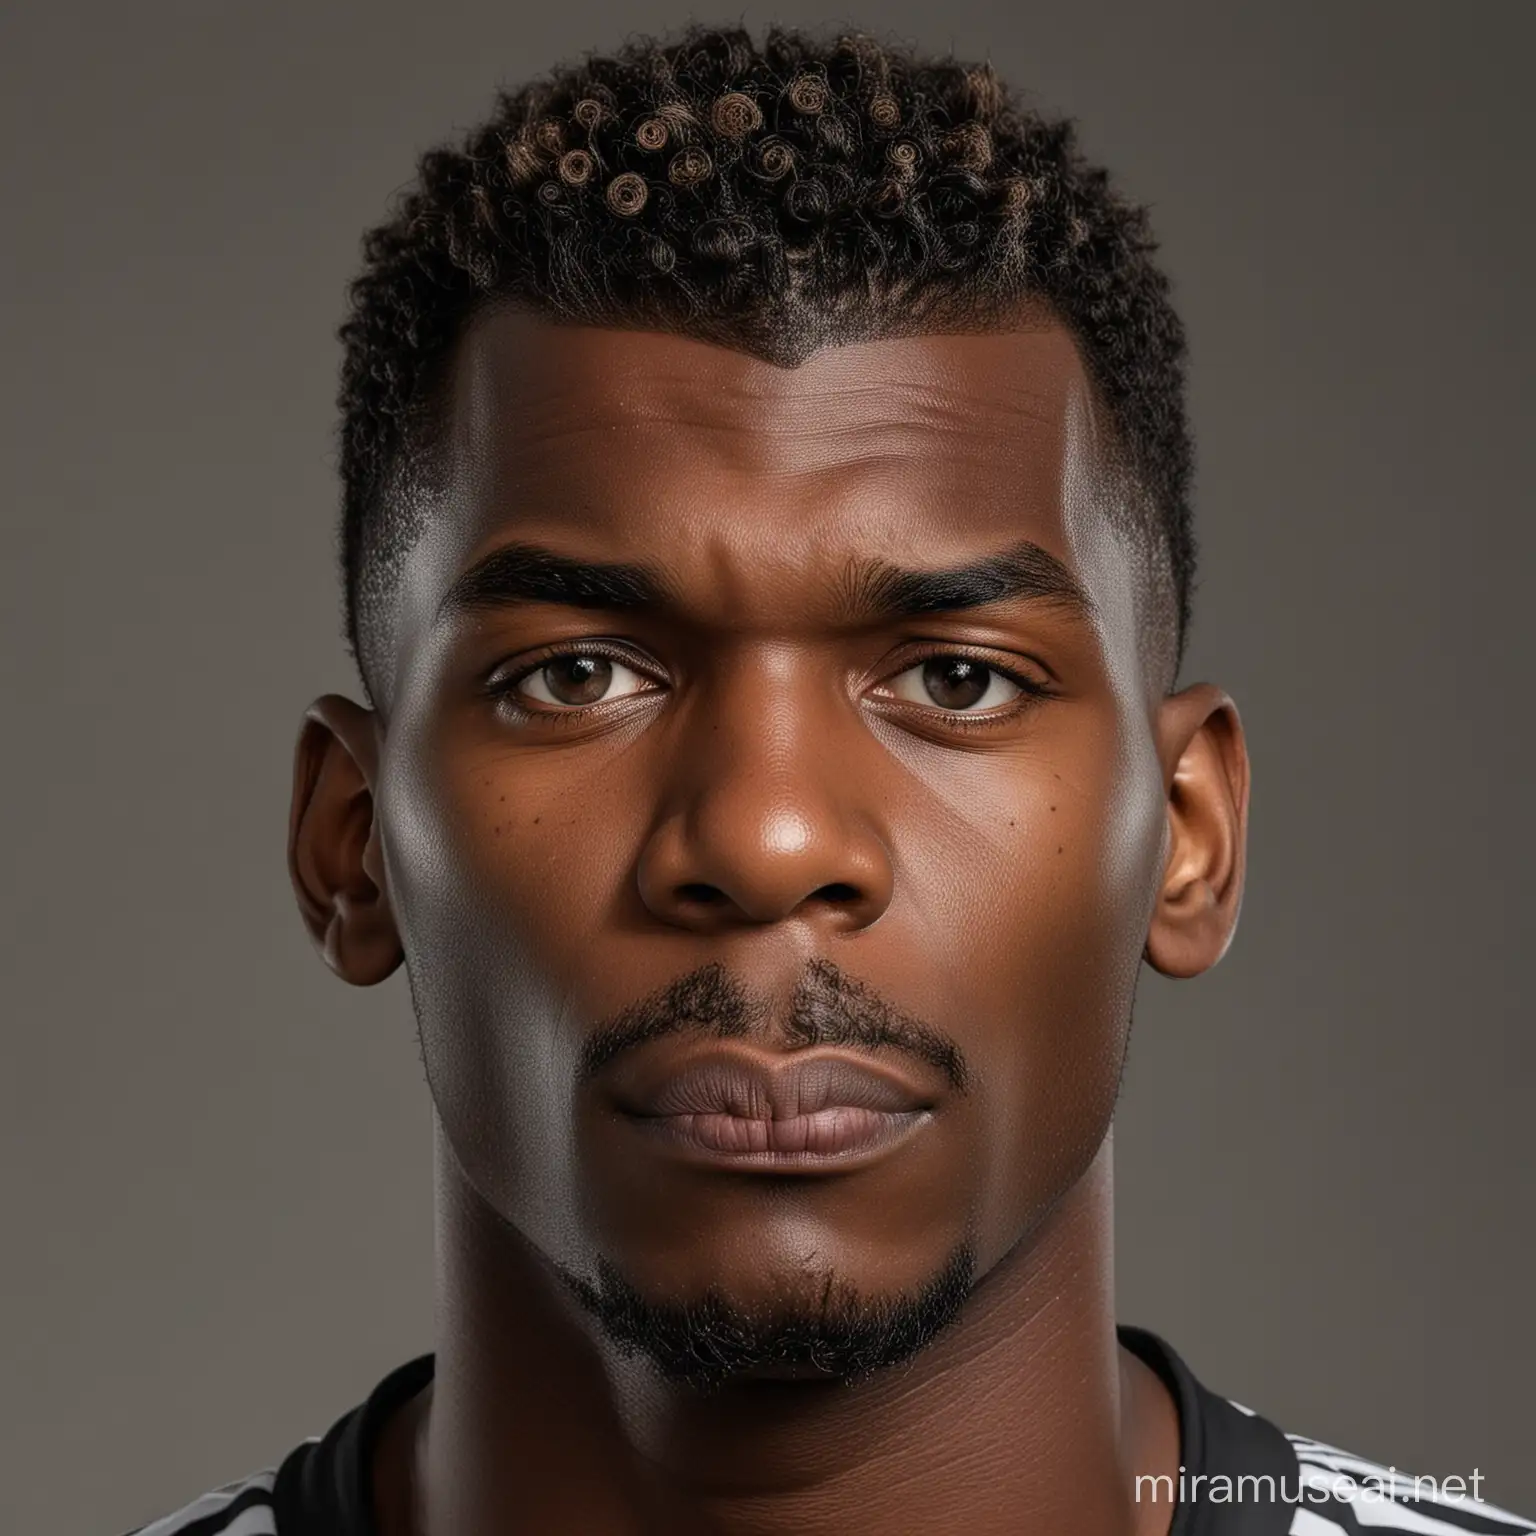 "85mm DSLR colour photography of a very detailed headshot fitting all of head and hair in frame. 20 year Paul pogba  grey background"